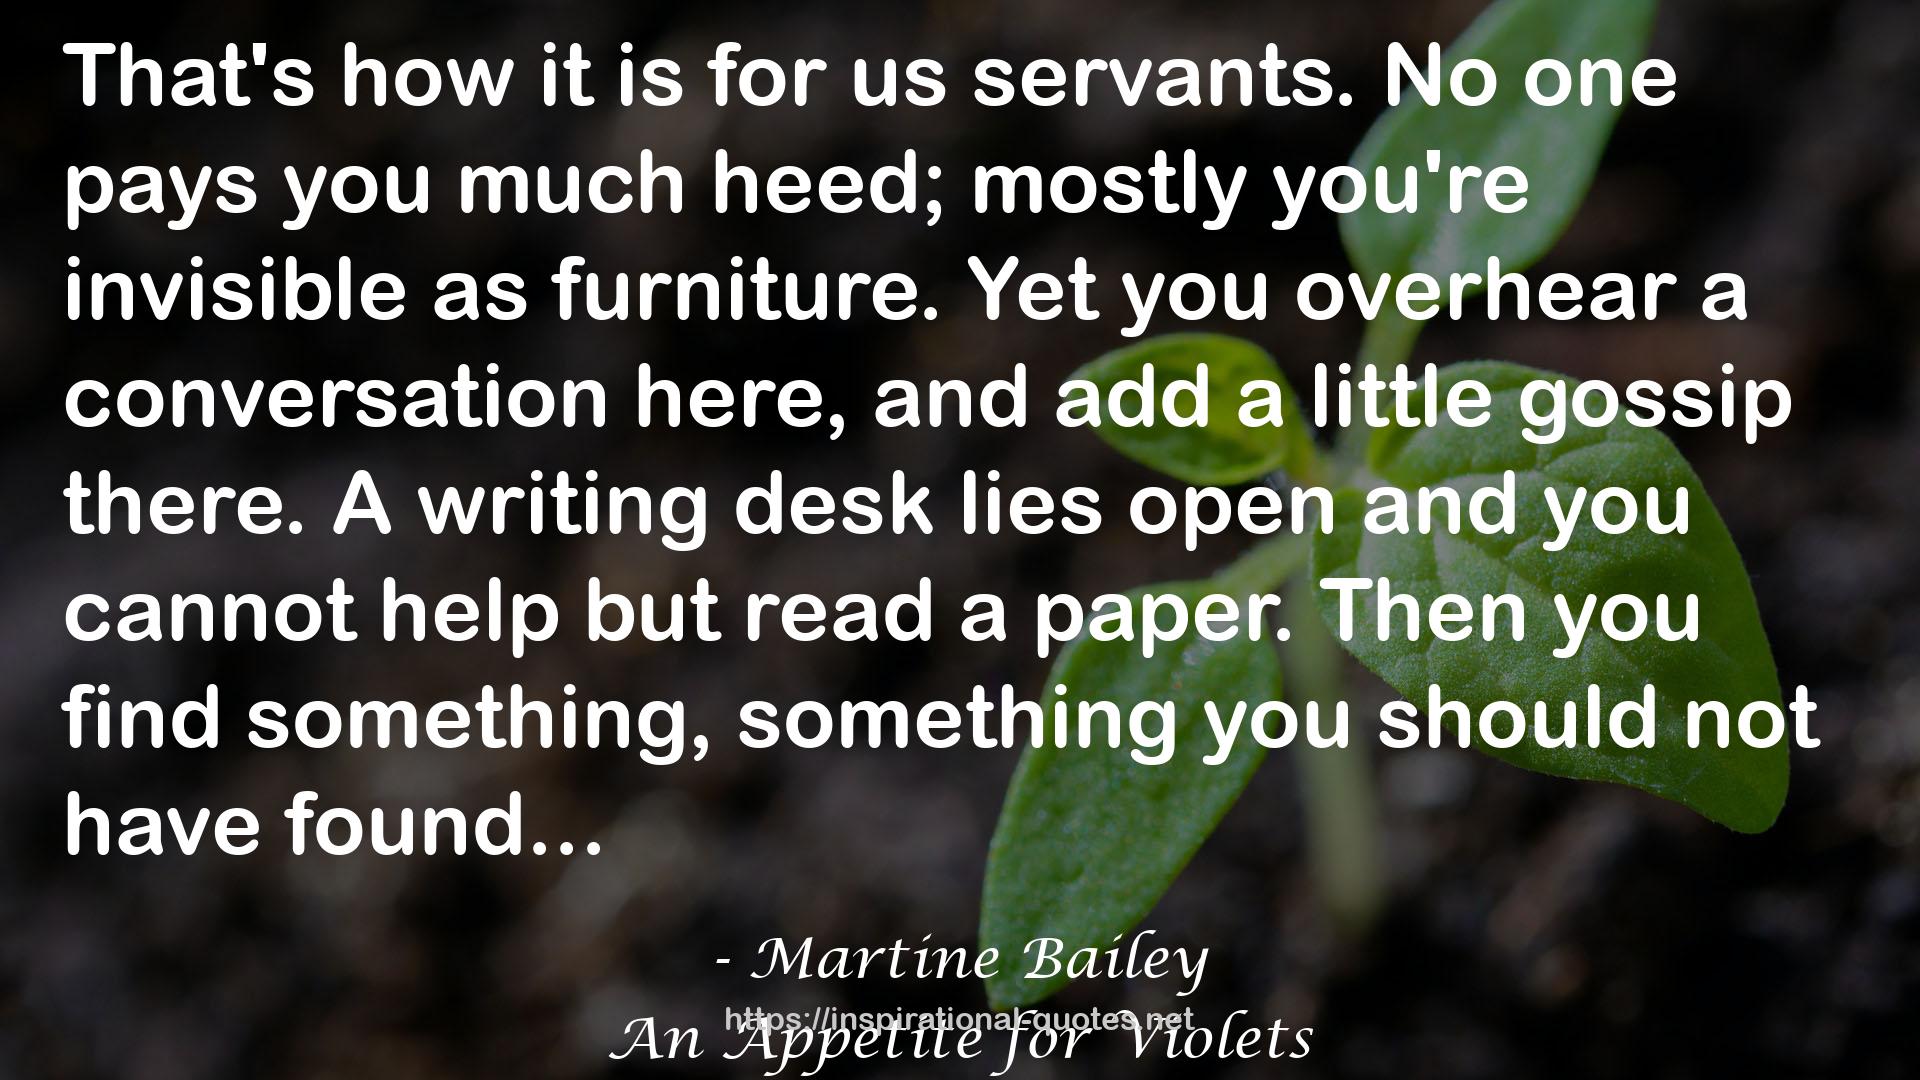 Martine Bailey QUOTES